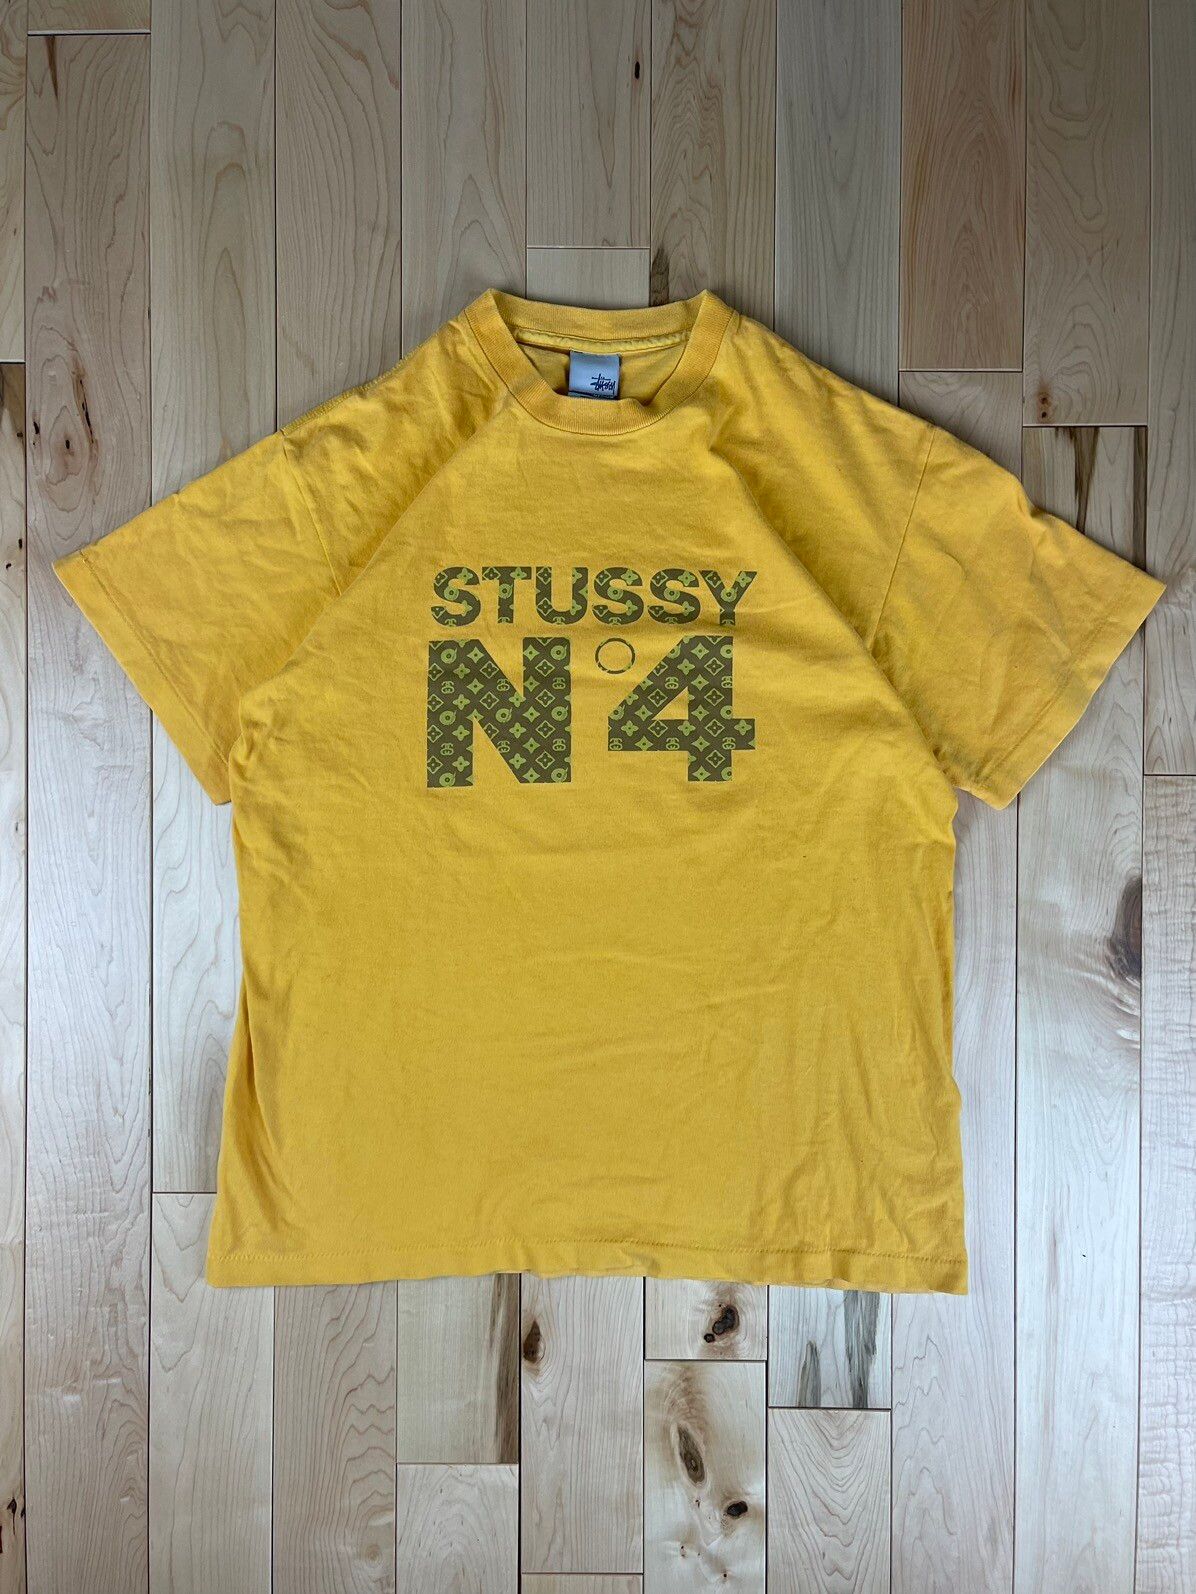 Stussy Early 2000s Stussy N04 Bootleg Chanel Graphic T-Shirt